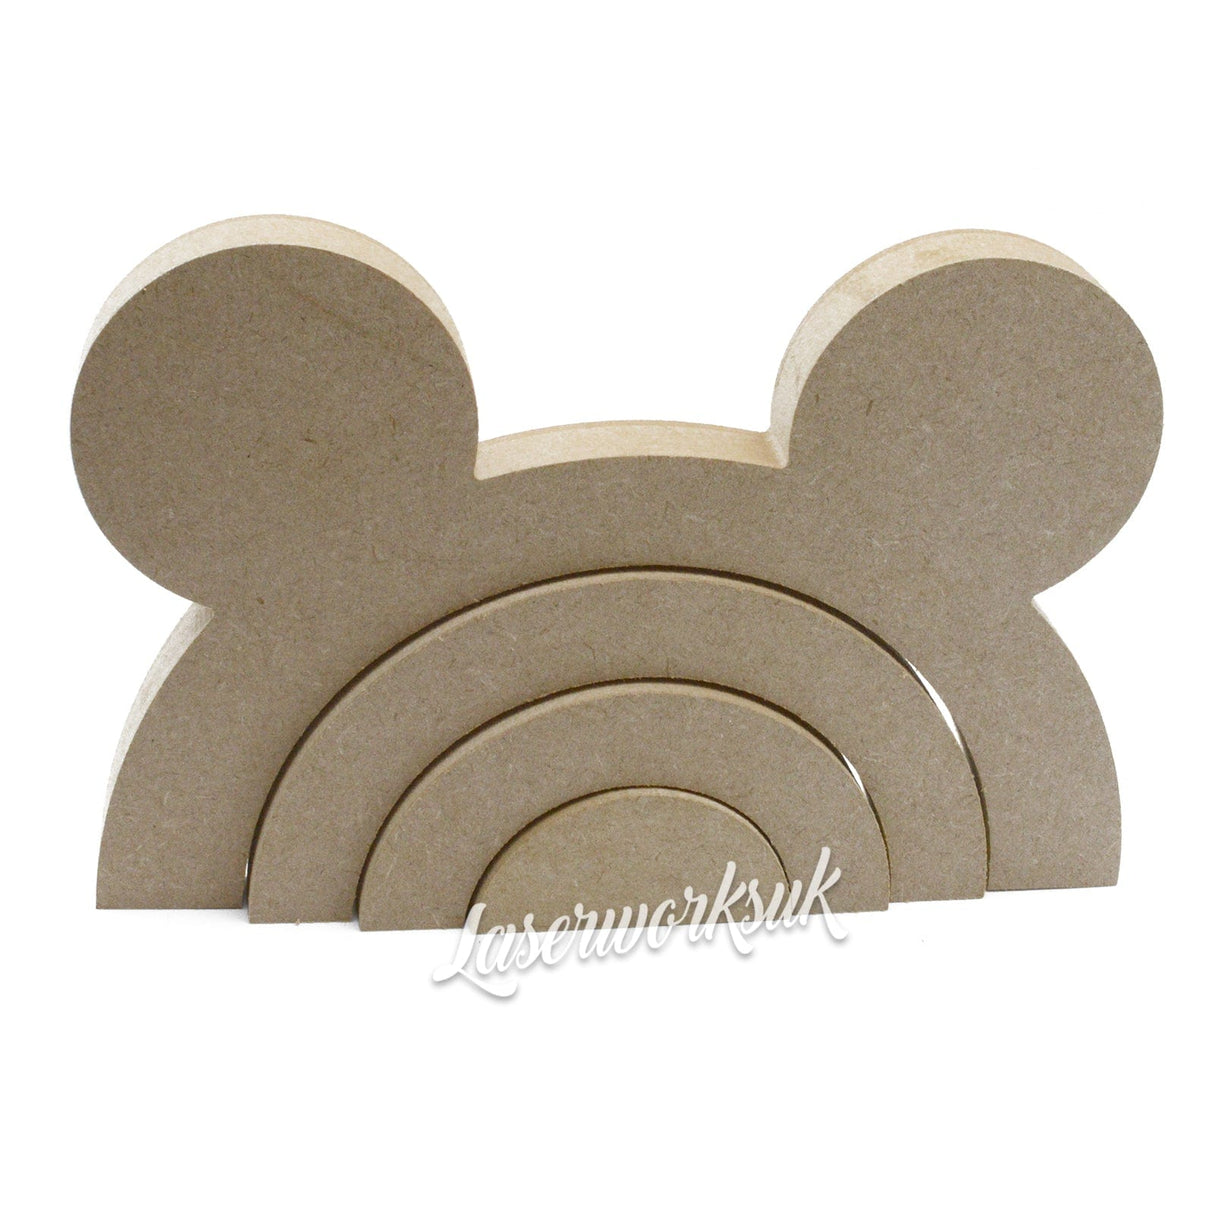 Freestanding Stacking Rainbow With Mouse Ears -18mm MDF Nursery Décor - Laserworksuk